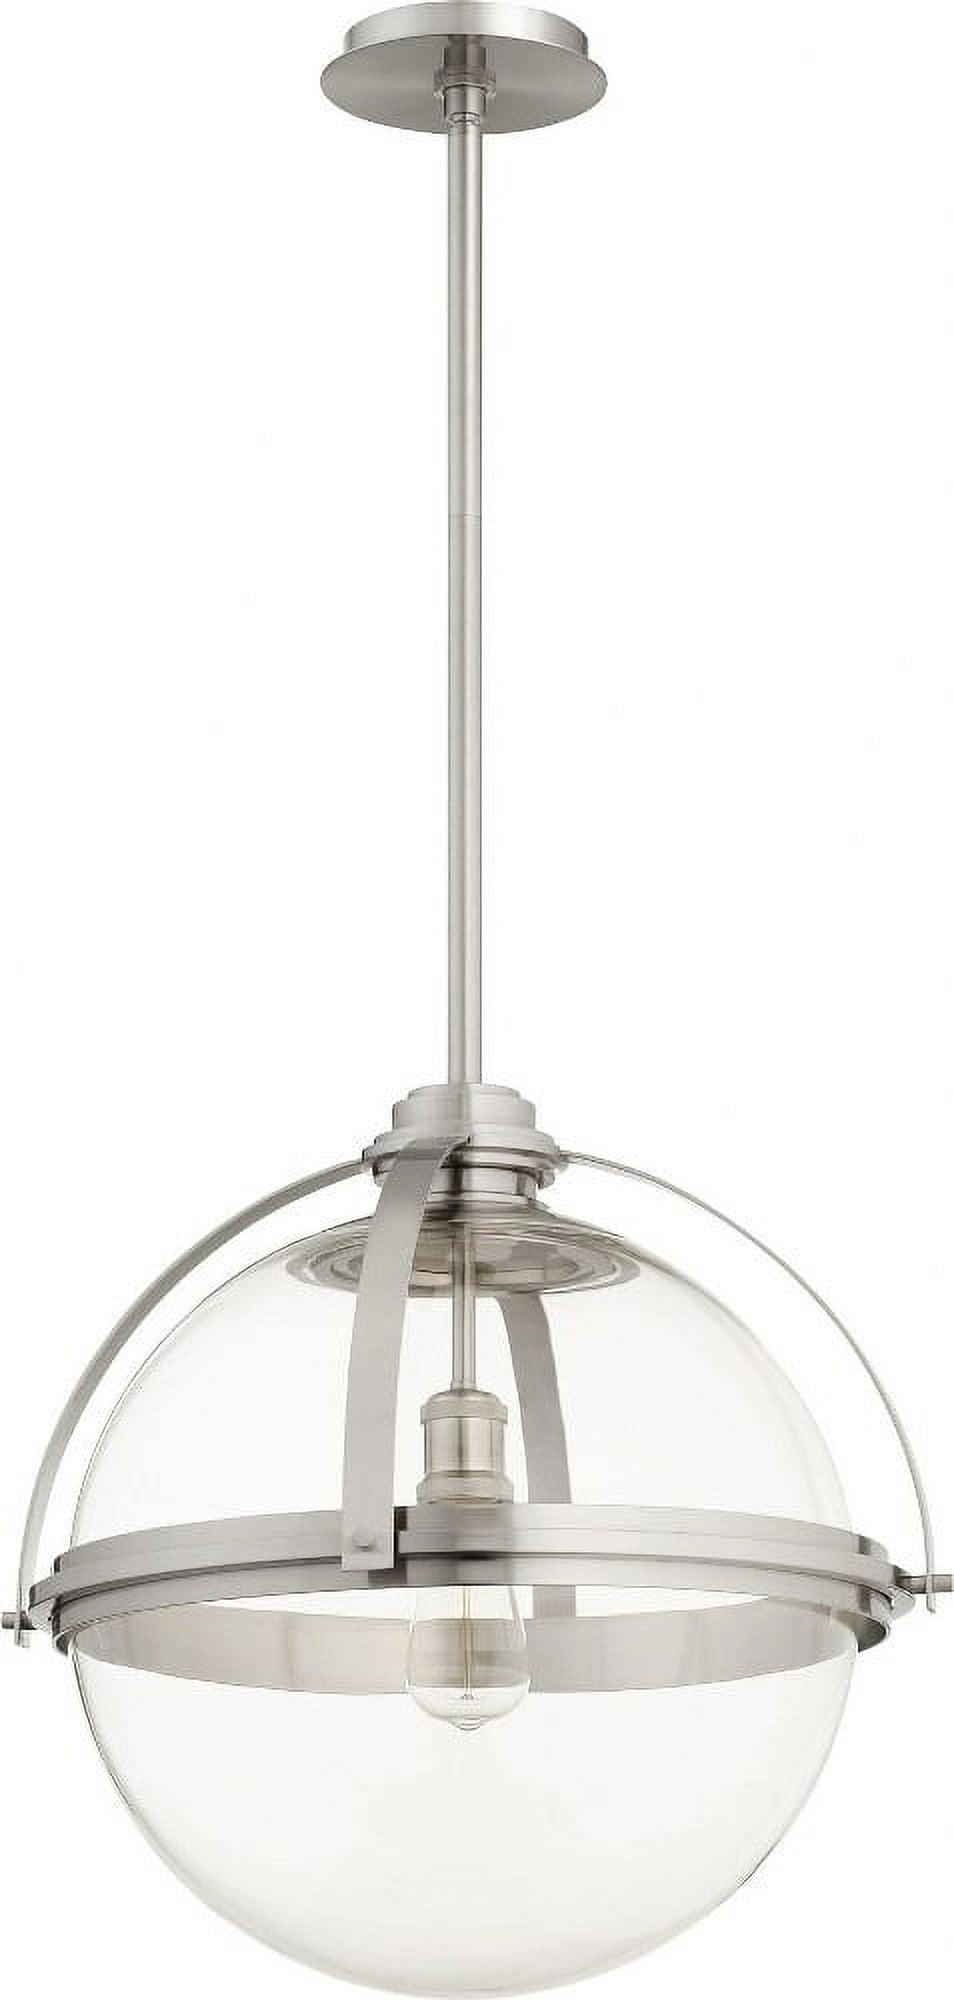 Satin Nickel 20" Globe Pendant Light with Clear Glass Shade